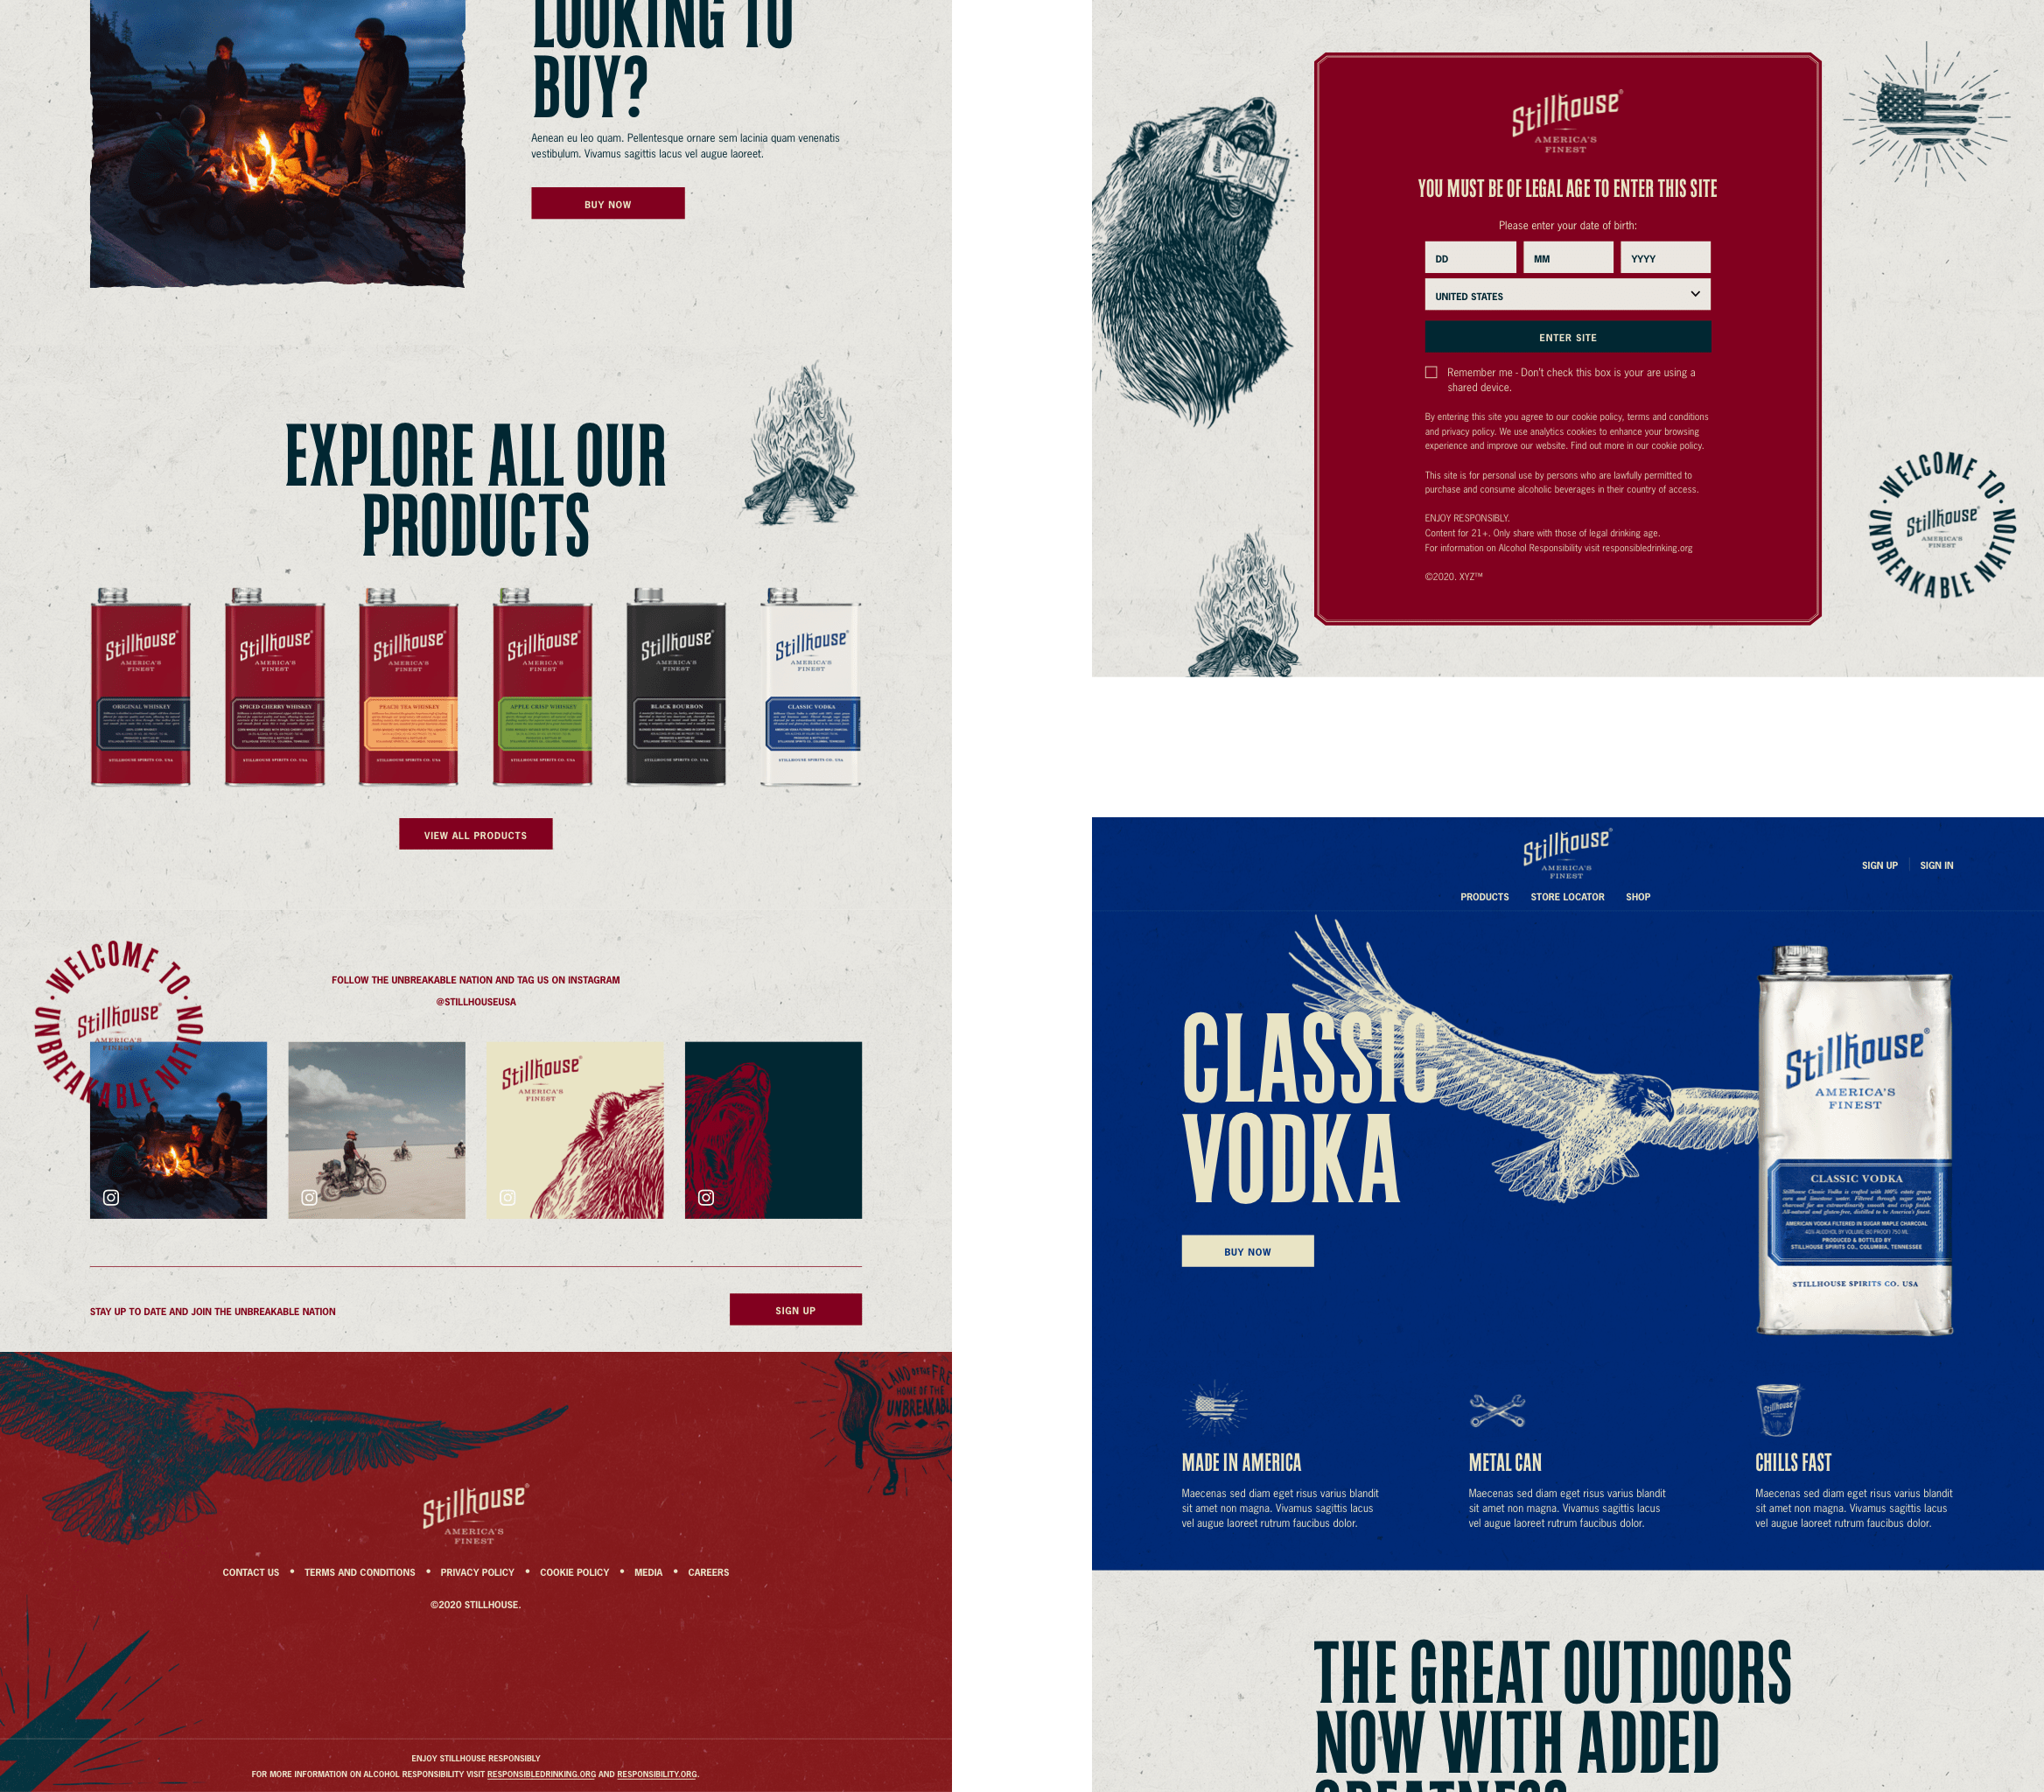 Bacardi Stillhouse lower product page, age gate and vodka product page design